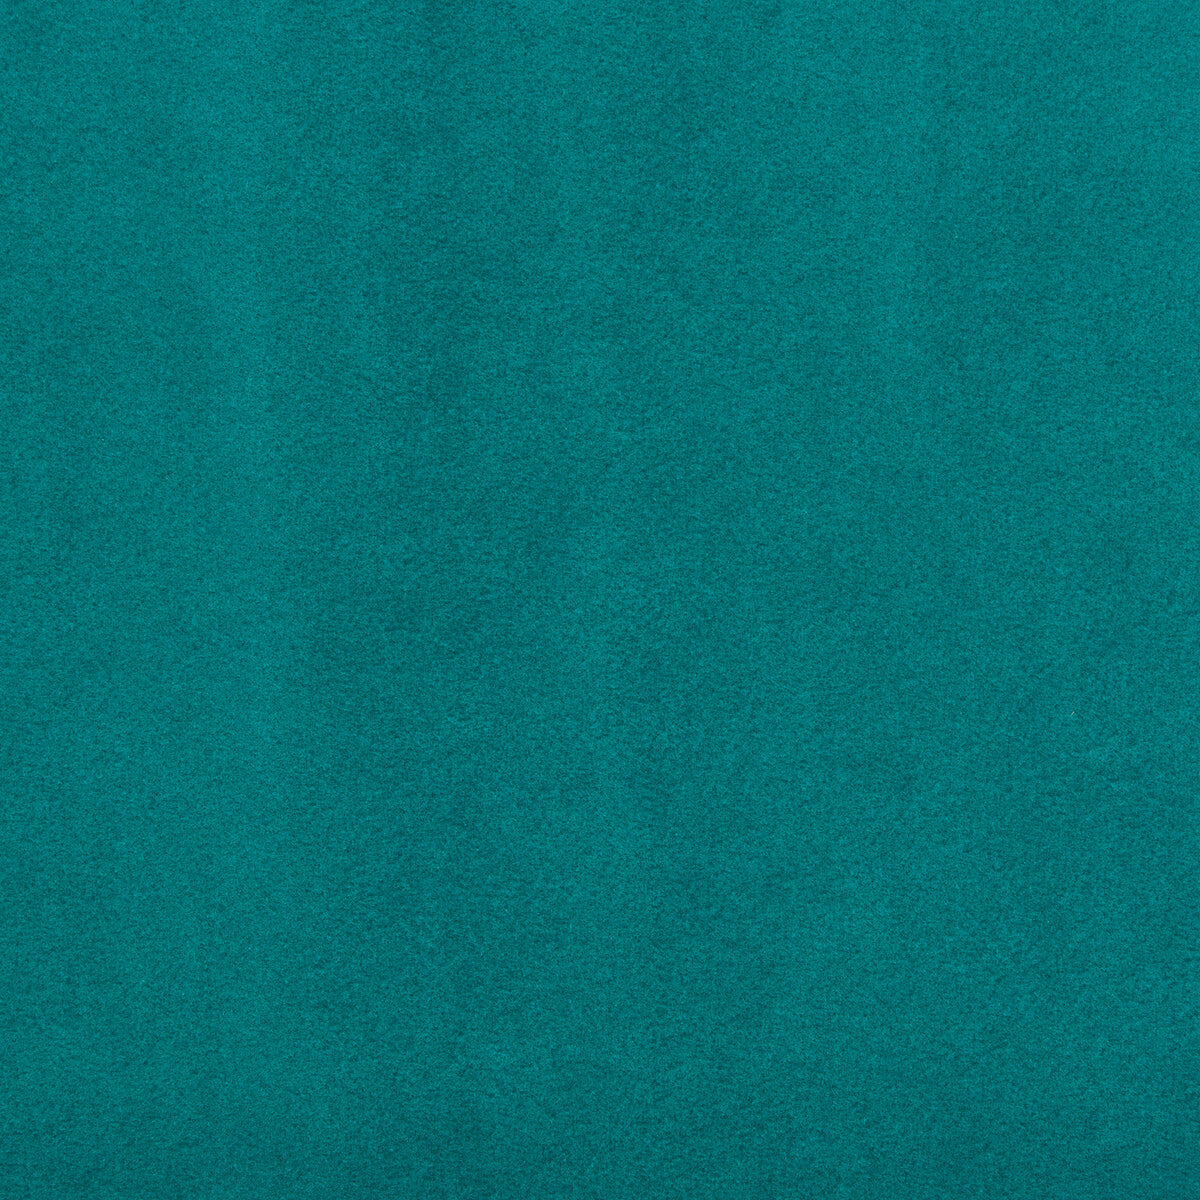 Ultrasuede Green fabric in teal color - pattern 30787.3535.0 - by Kravet Design in the Performance collection